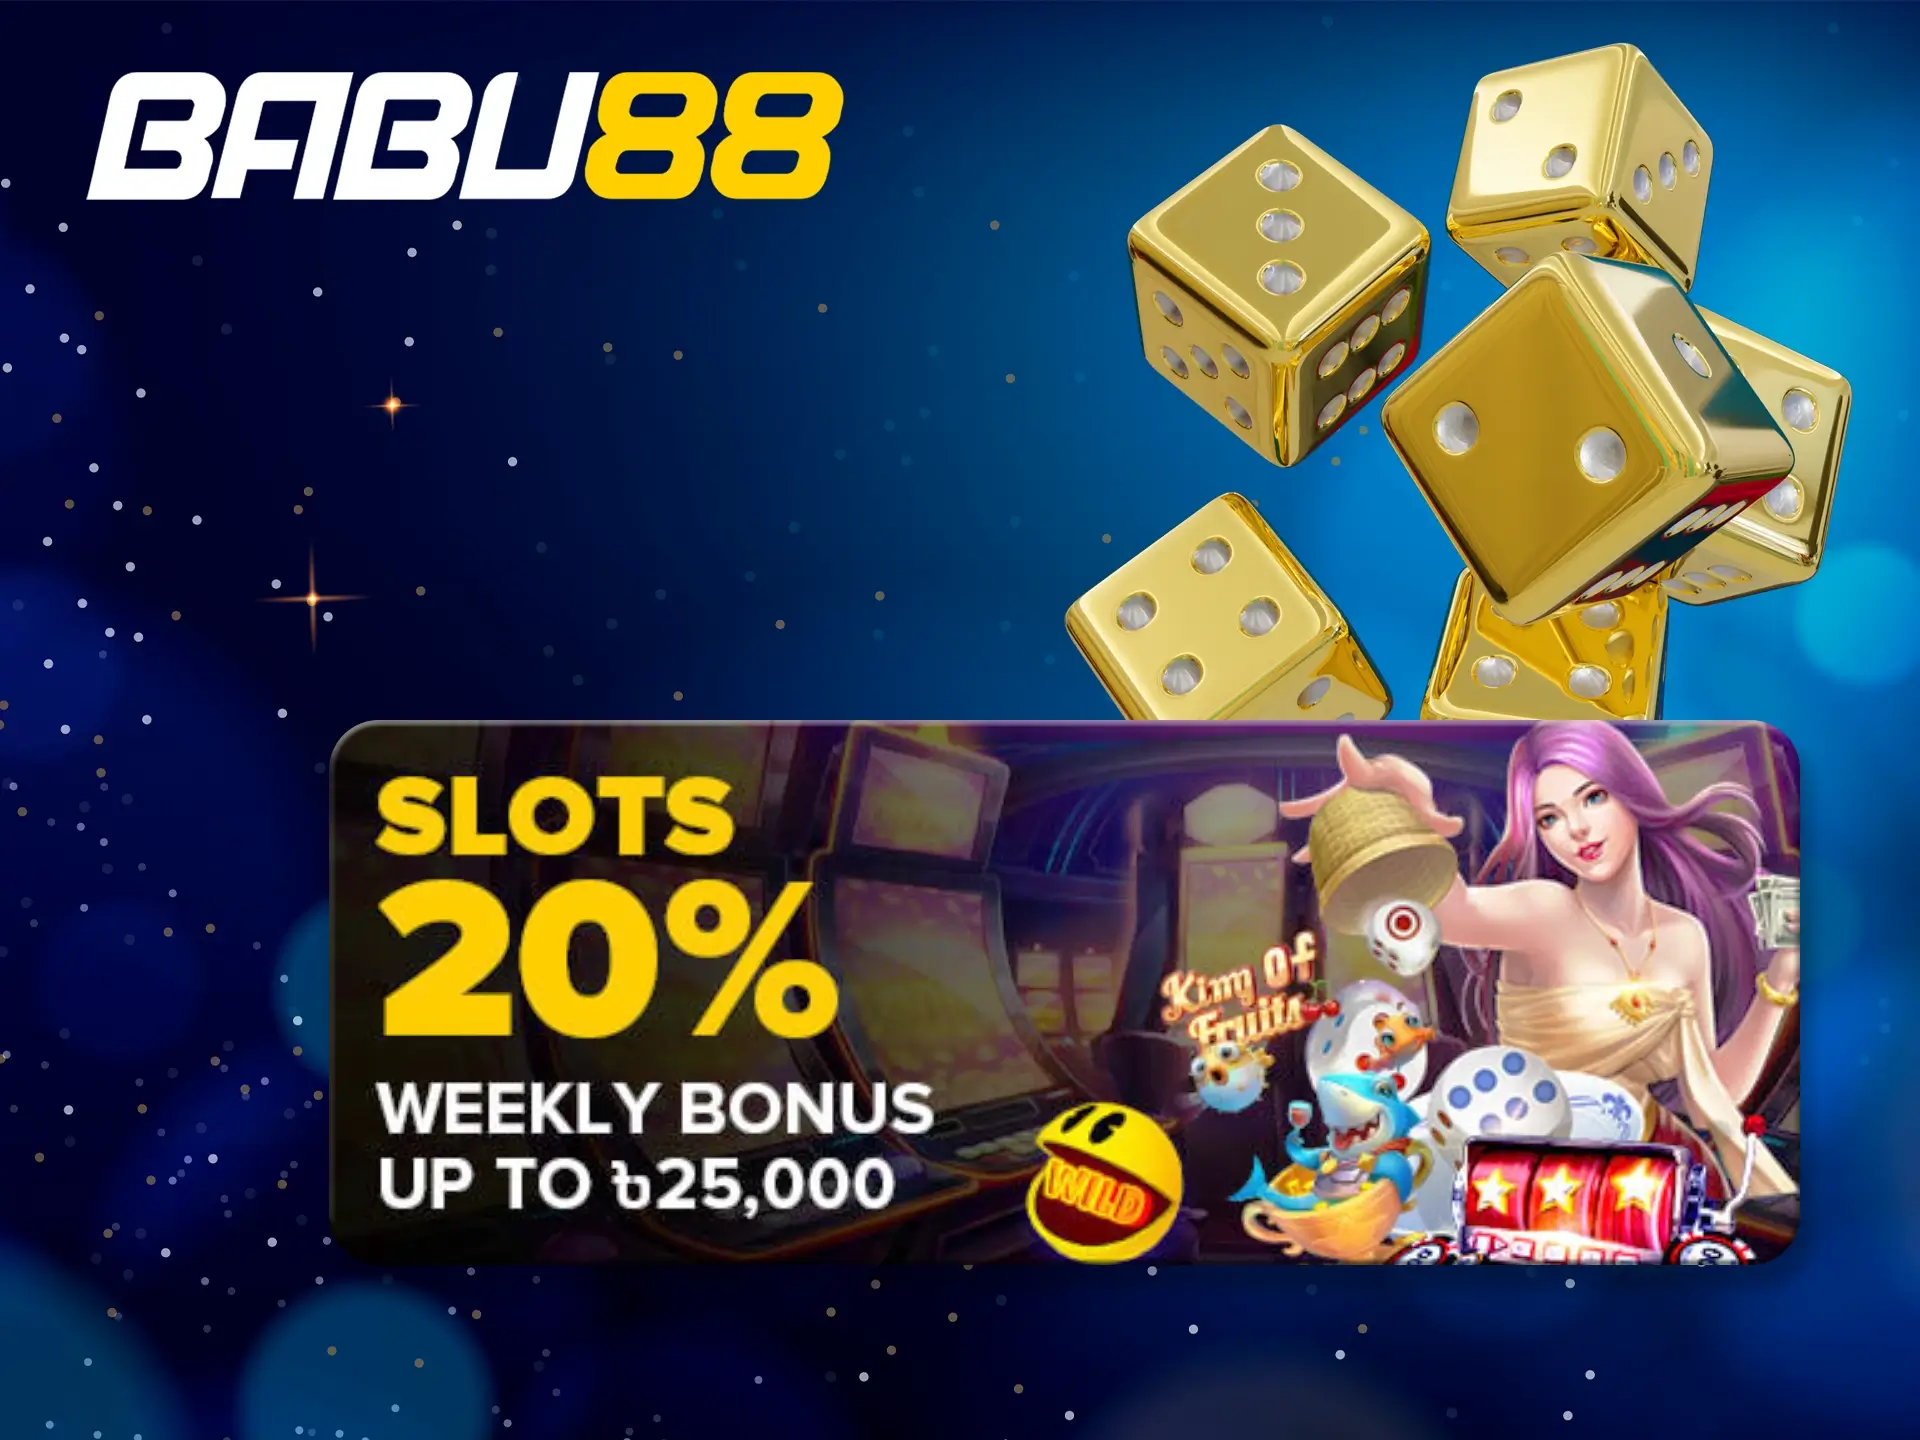 Fans of card games and slots get their first bonus from Babu88 for a solid start at the casino.